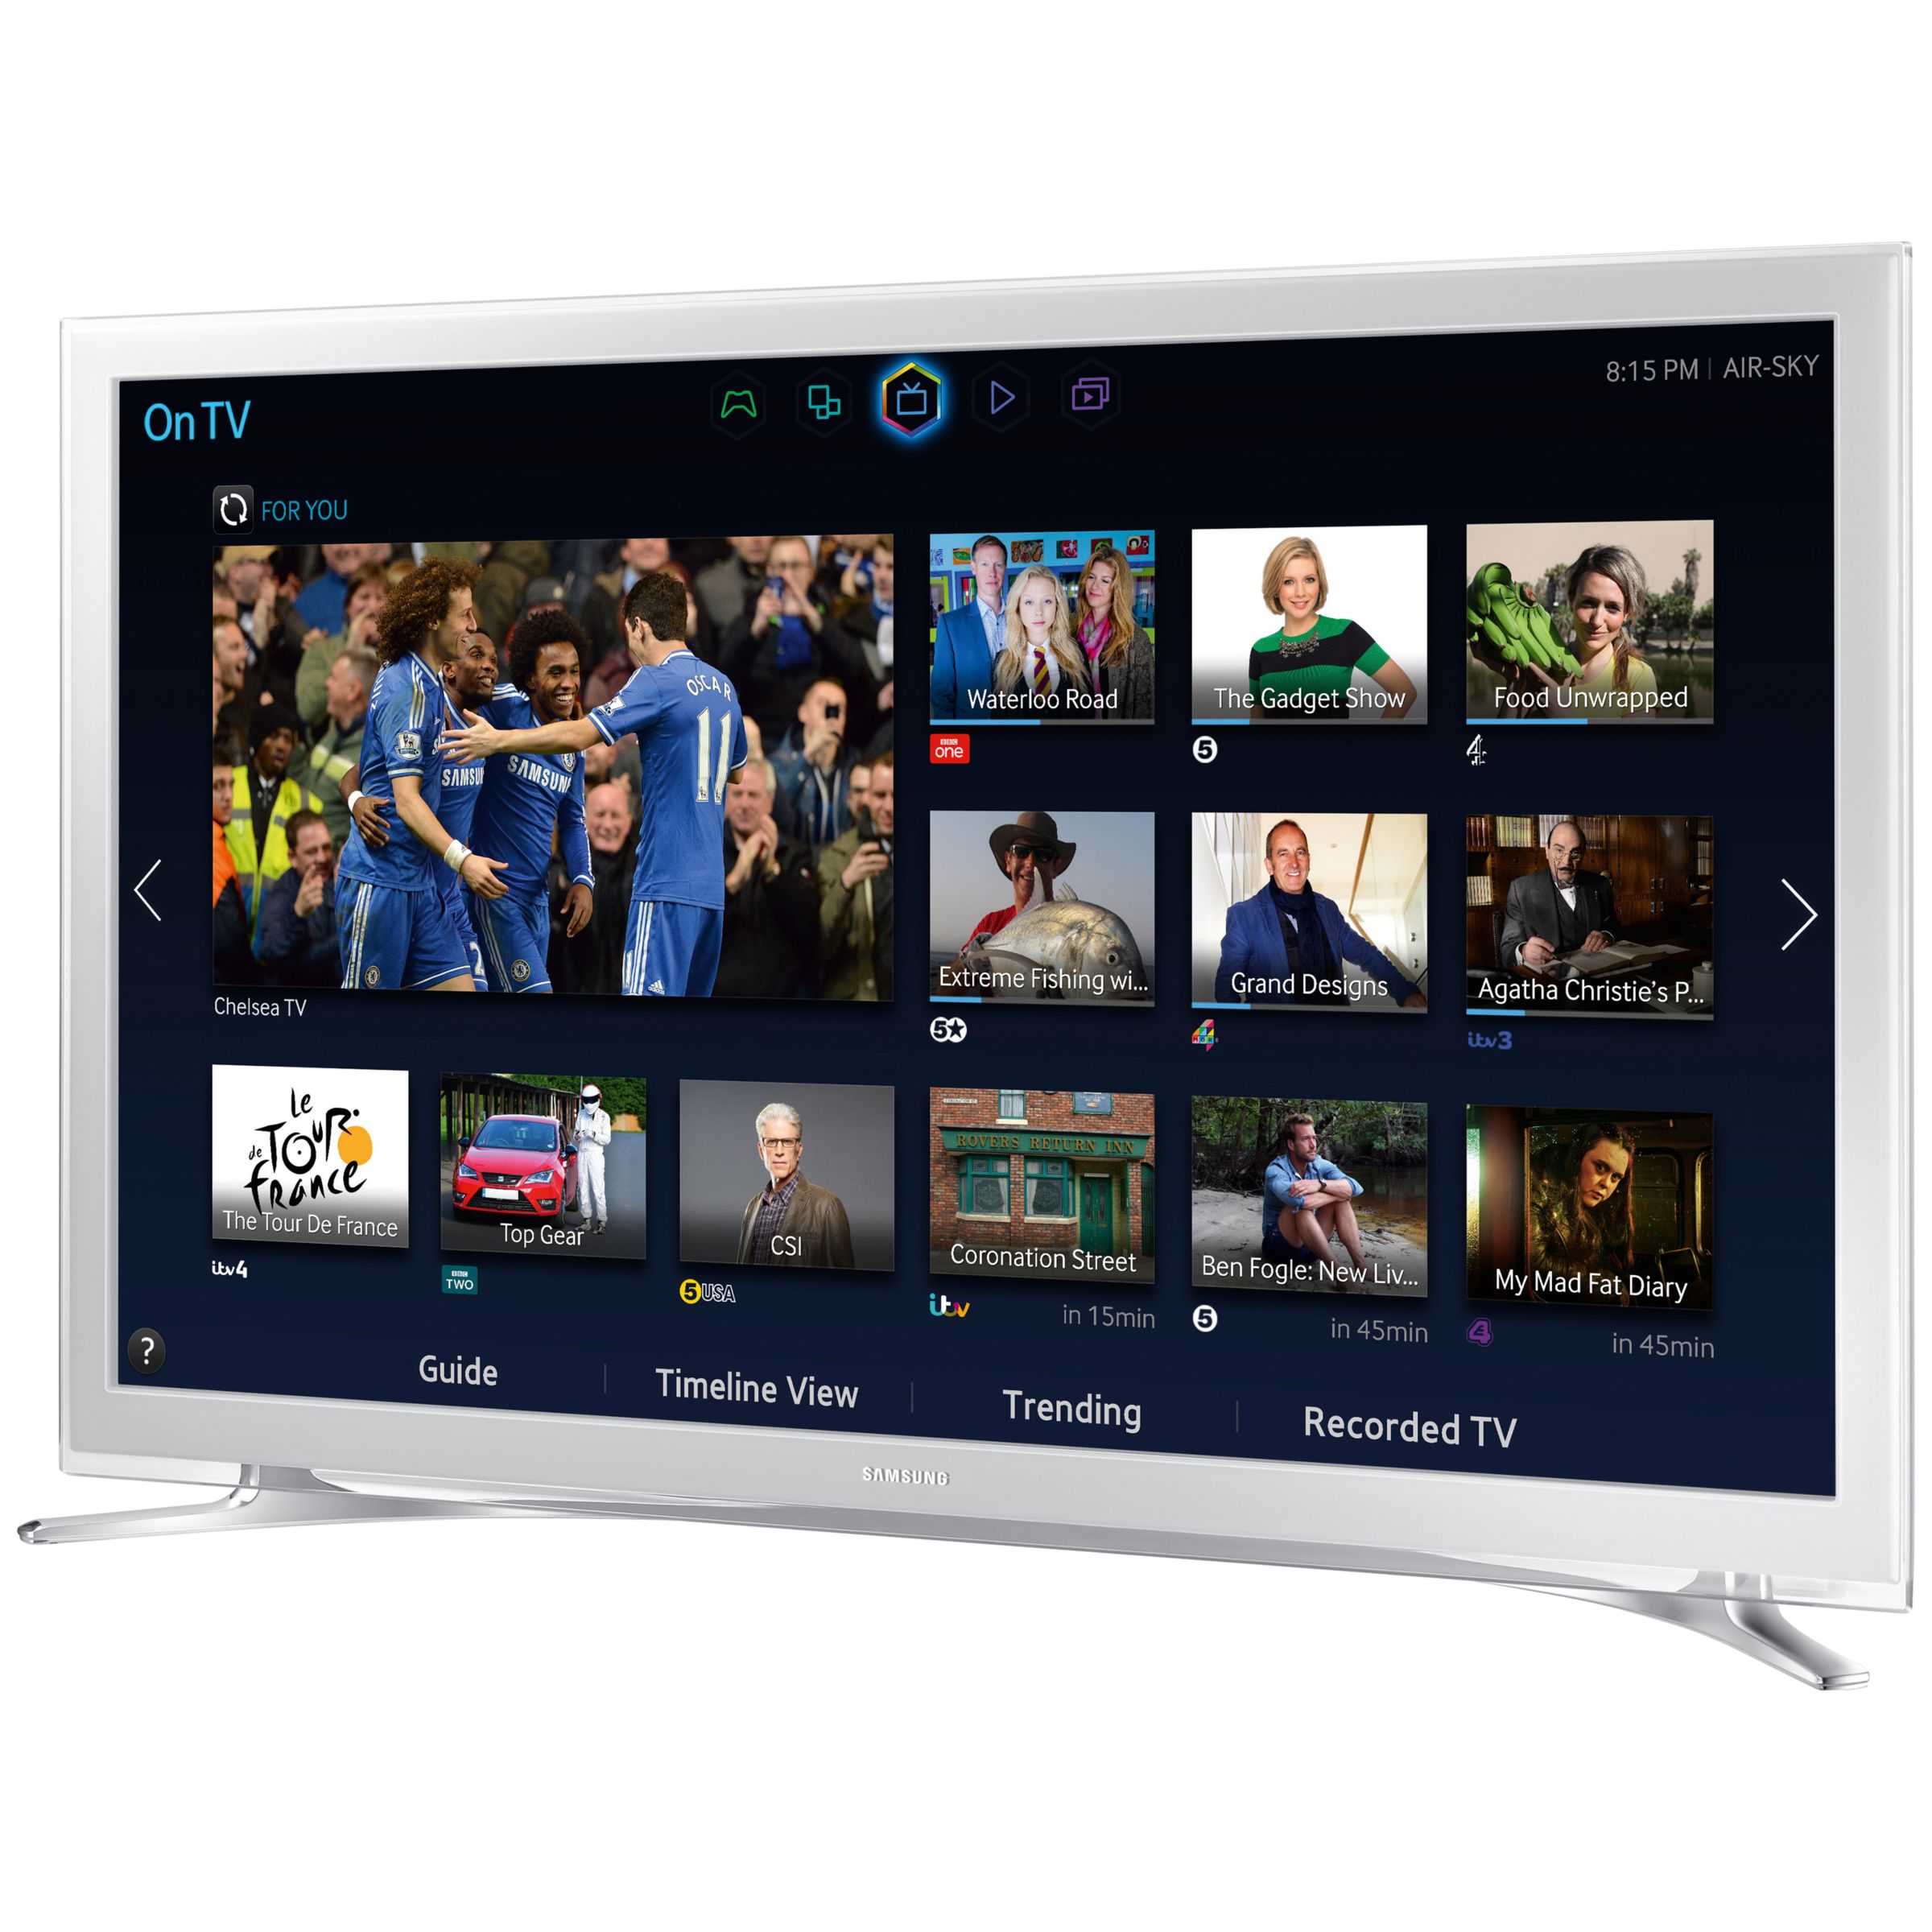 Samsung UE32H4500 LED HD Ready Smart TV, 32" with Freeview HD